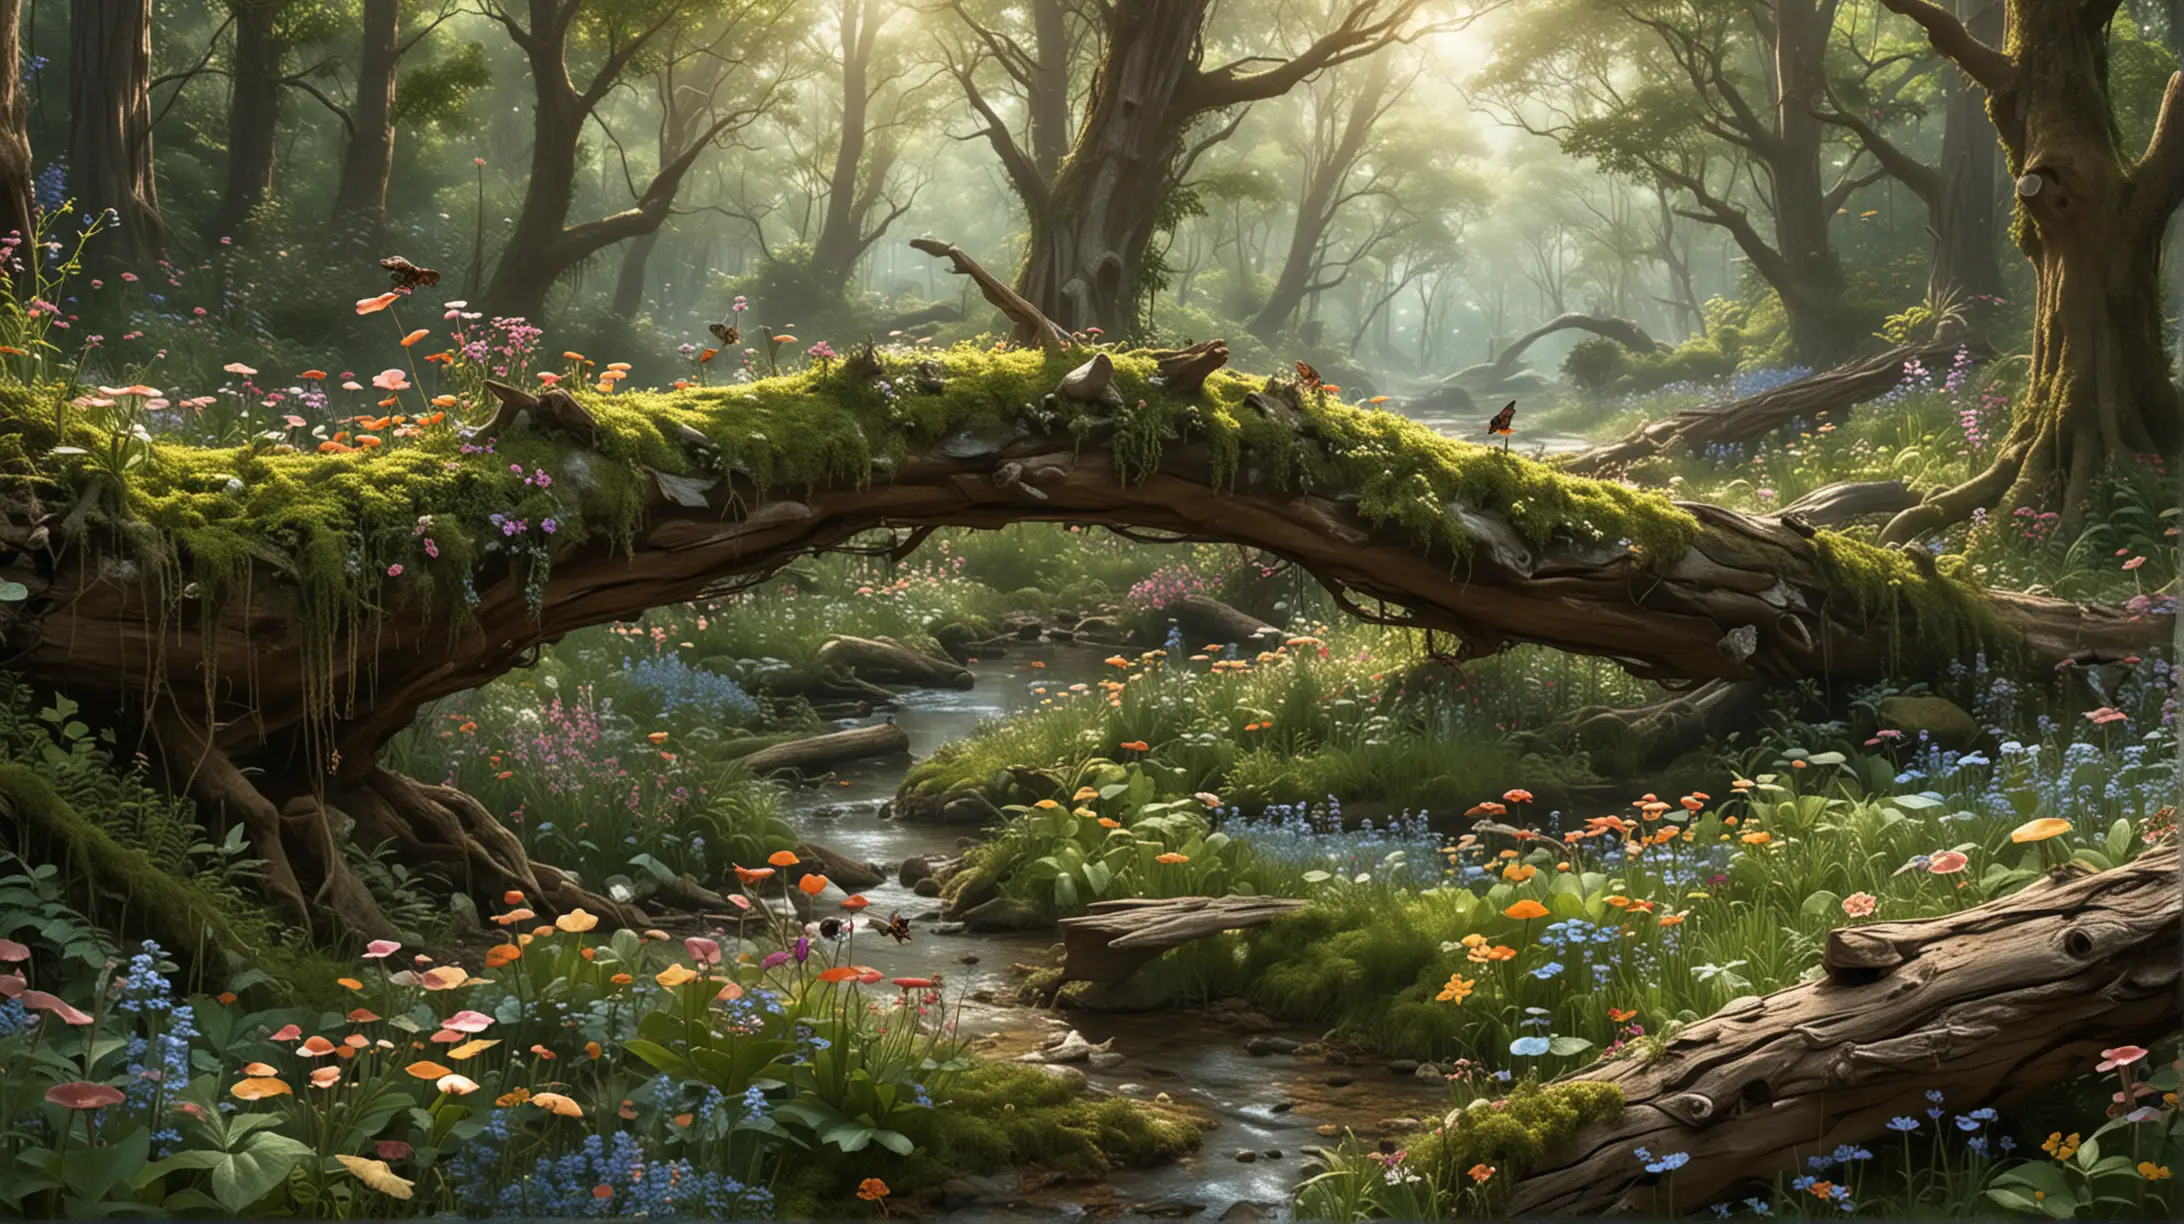 A panoramic view of a magical fantasy forest. The dense underbrush mimics the impenetrable canopy created by huge, ancient, bent trees, and occasionally allows a glimpse of some wondrous, fairy creature.

In the distance is a fallen tree. A rotting log near a stump. A quaint brook. Huge, brightly colored fungi and tiny pastel flowers are scattered about.

Bees and humming birds pollinate blossoms while  in the upper branches can be seen birds and small animals, and the occasional fairy creature. Tiny abodes are camouflaged throughout the scene.